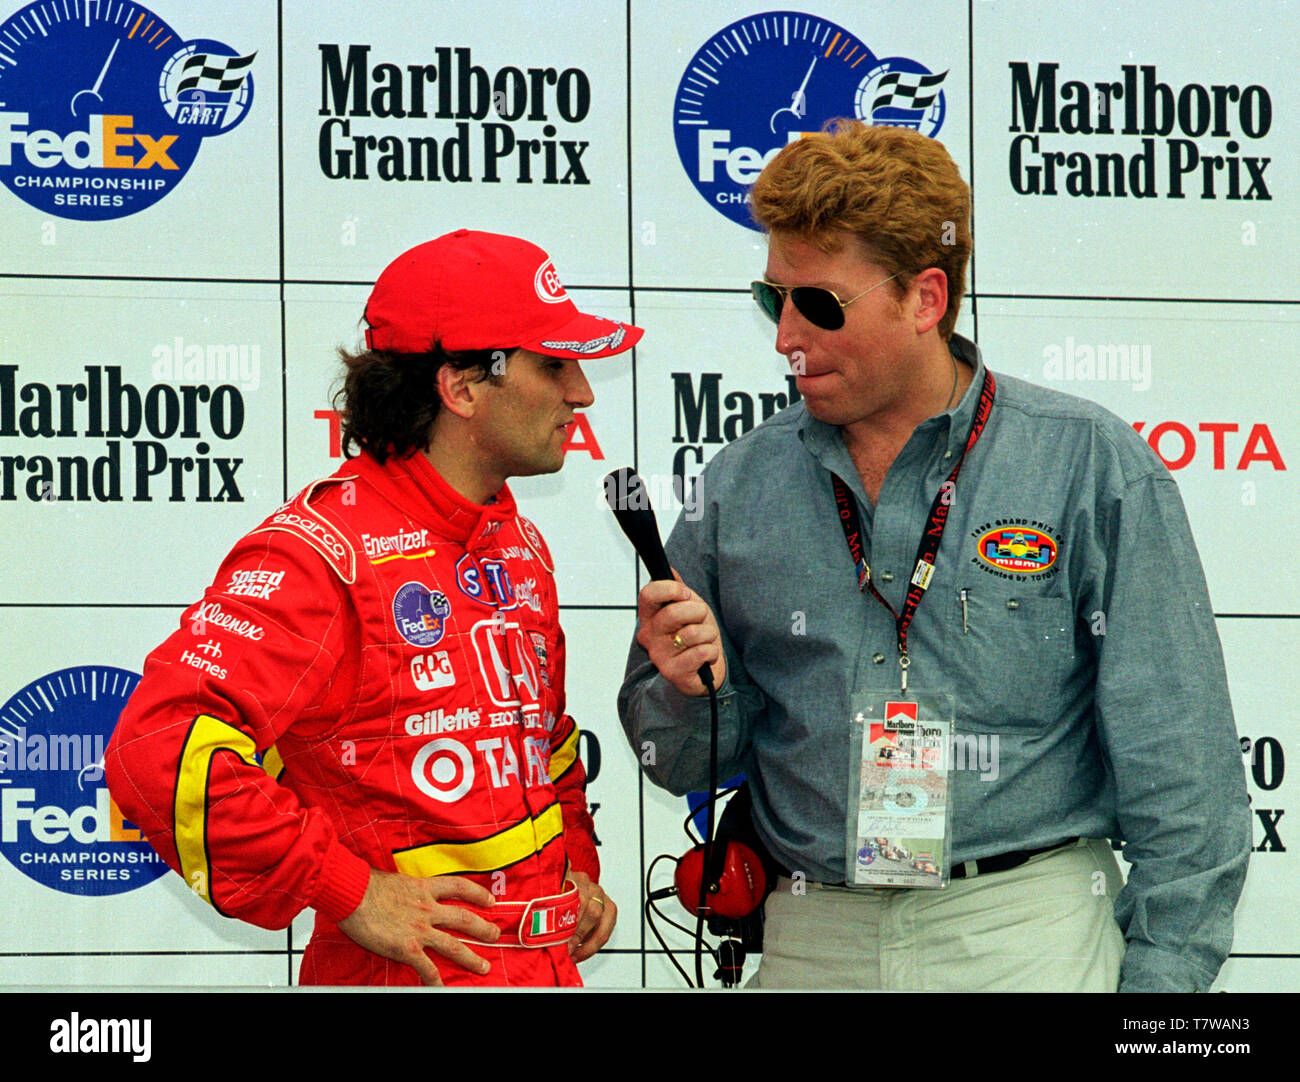 Cart driver Alex Zanardi being interviewed by Ed Berliner on the podium at the 1998 Grand Prix of Miami at Homestead-Miami Speedway. Stock Photo